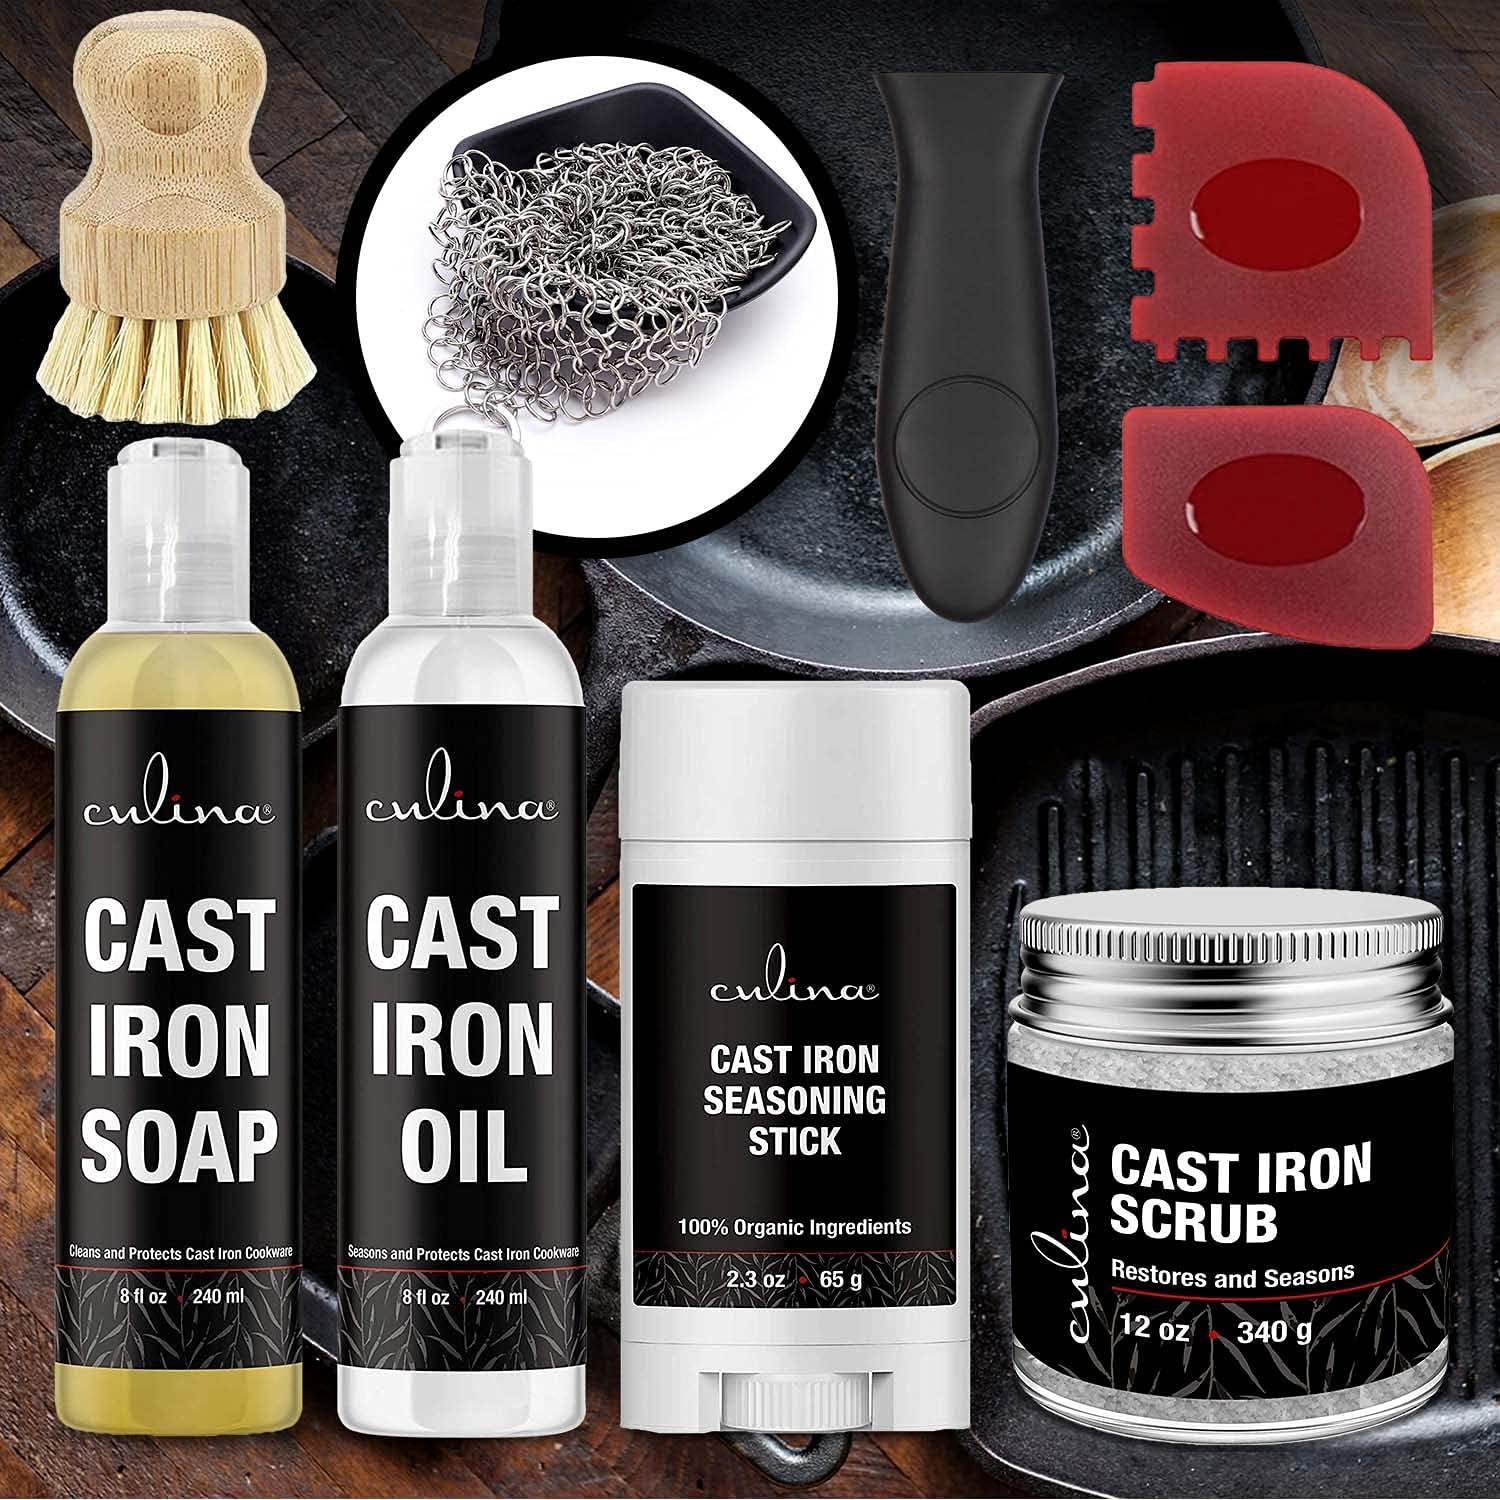 Culina Cast Iron Seasoning Stick & Soap Set | All Natural Ingredients |  Best for Cleaning, Non-stick Cooking & Restoring